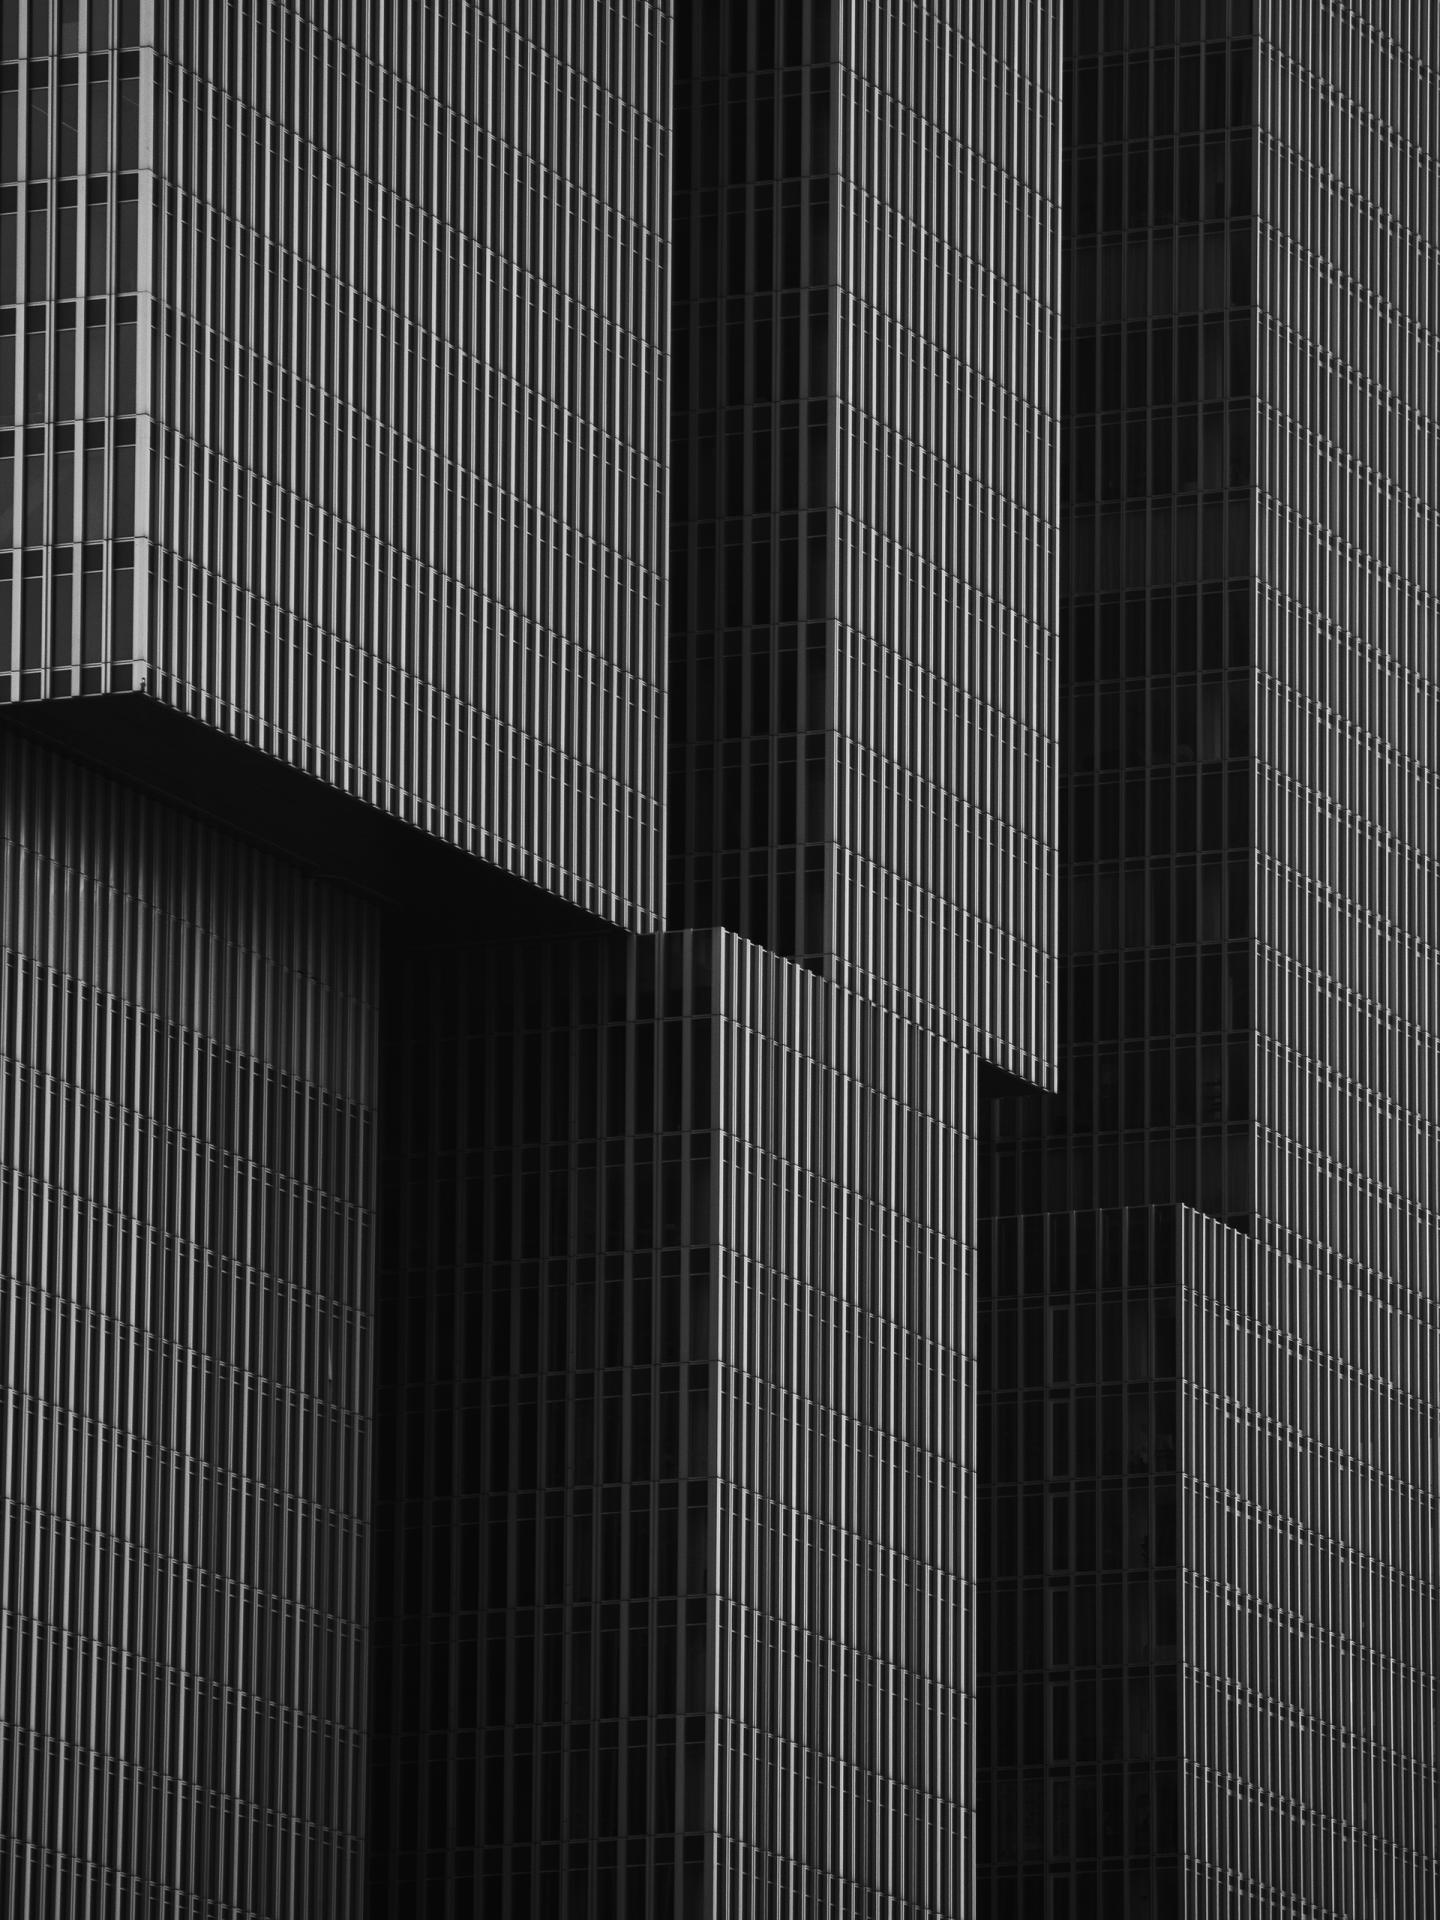 New York Photography Awards Winner - Concrete and Steel